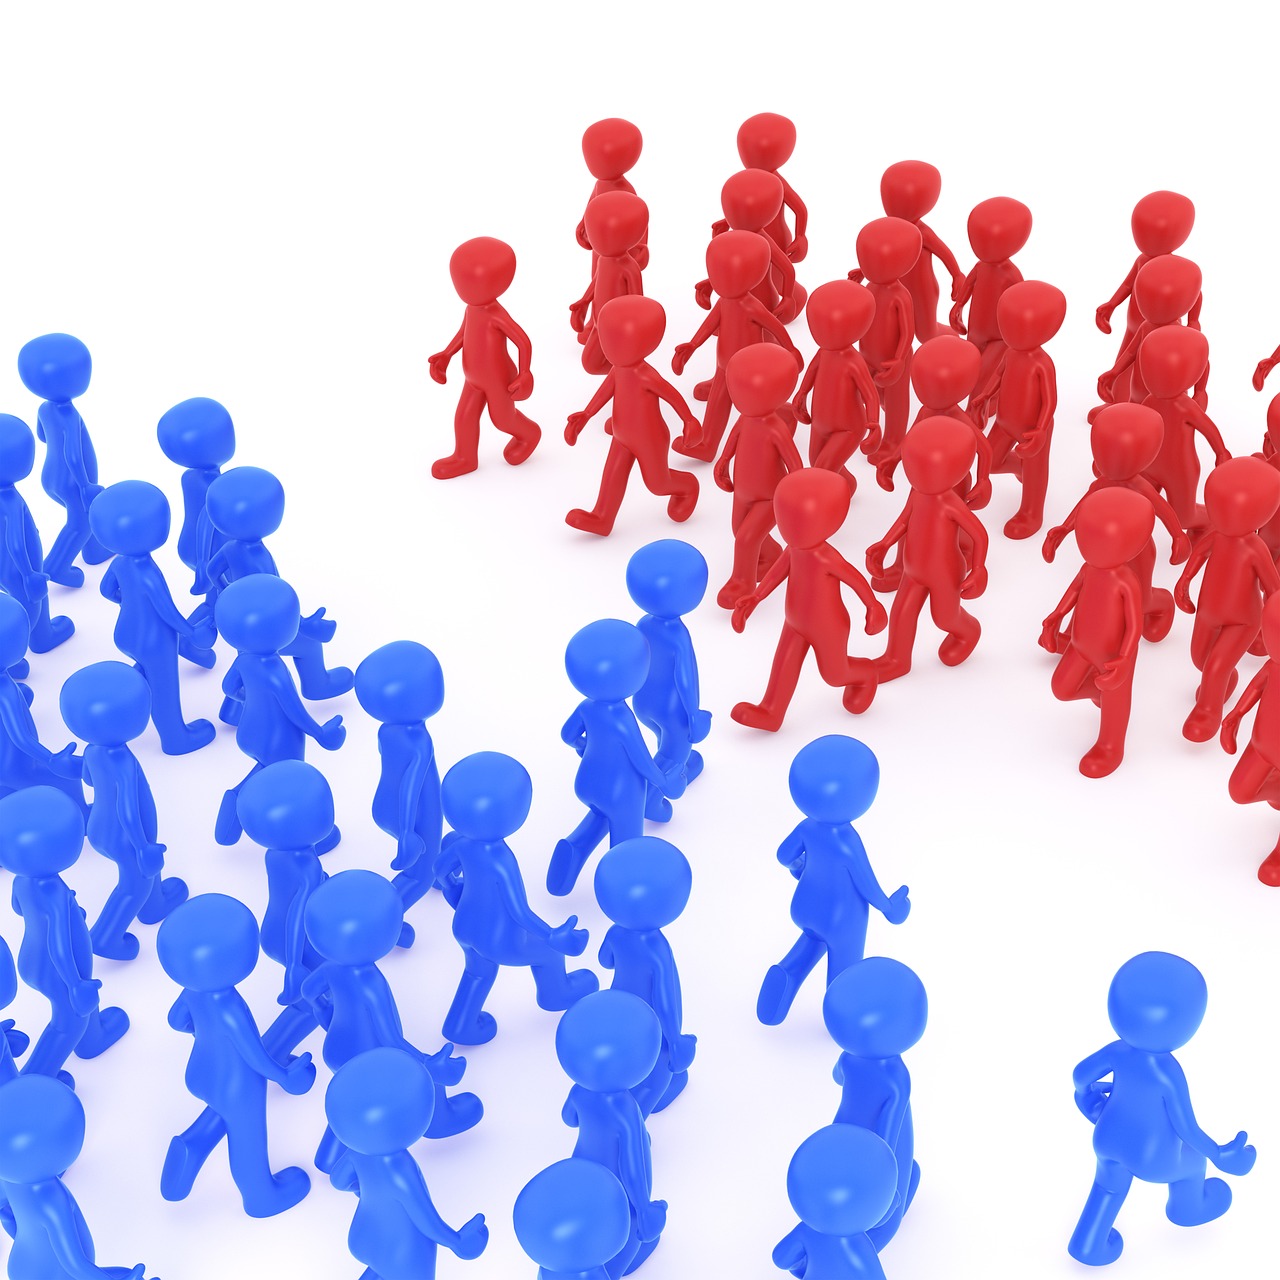 a group of red and blue people standing in a circle, people flee, patriot, true realistic image, in rows